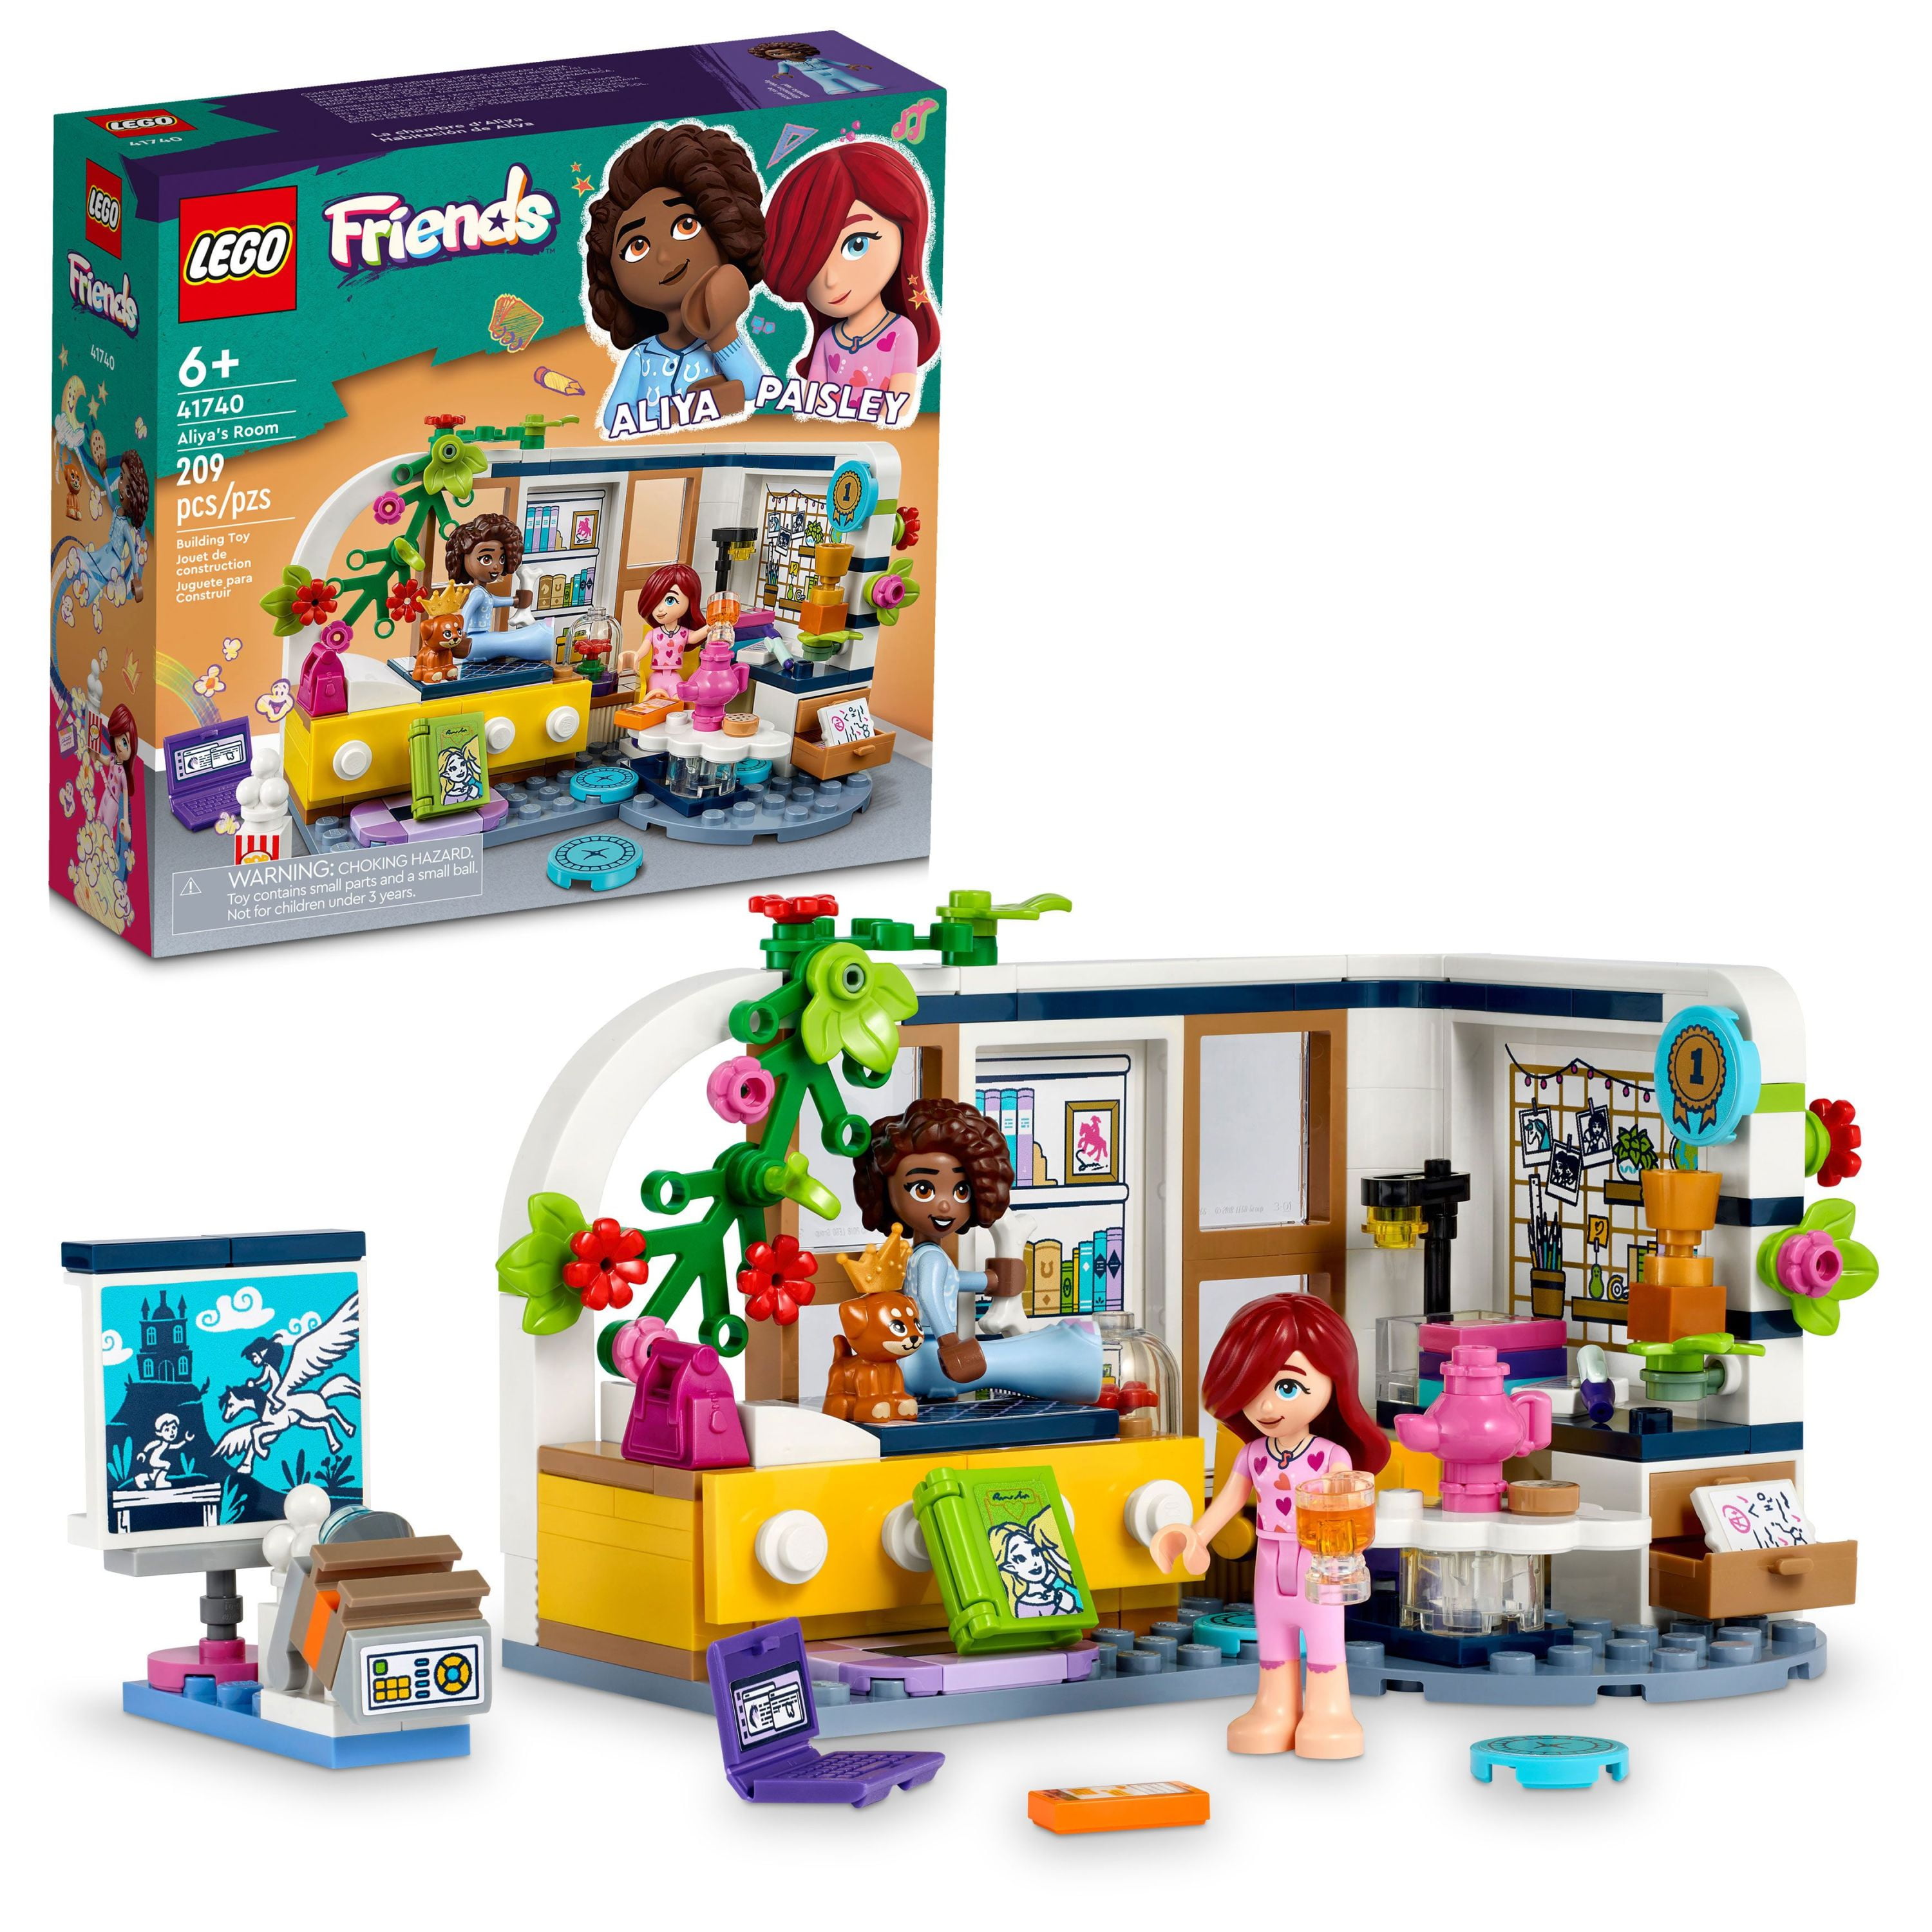 LEGO Friends Room 41740 Building Set - Collectible Toy Set with Paisley Aliya Mini-Doll, Puppy Figure, Mini Sleepover Party Bedroom Great Gift for Girls, and Kids Ages 6+ -